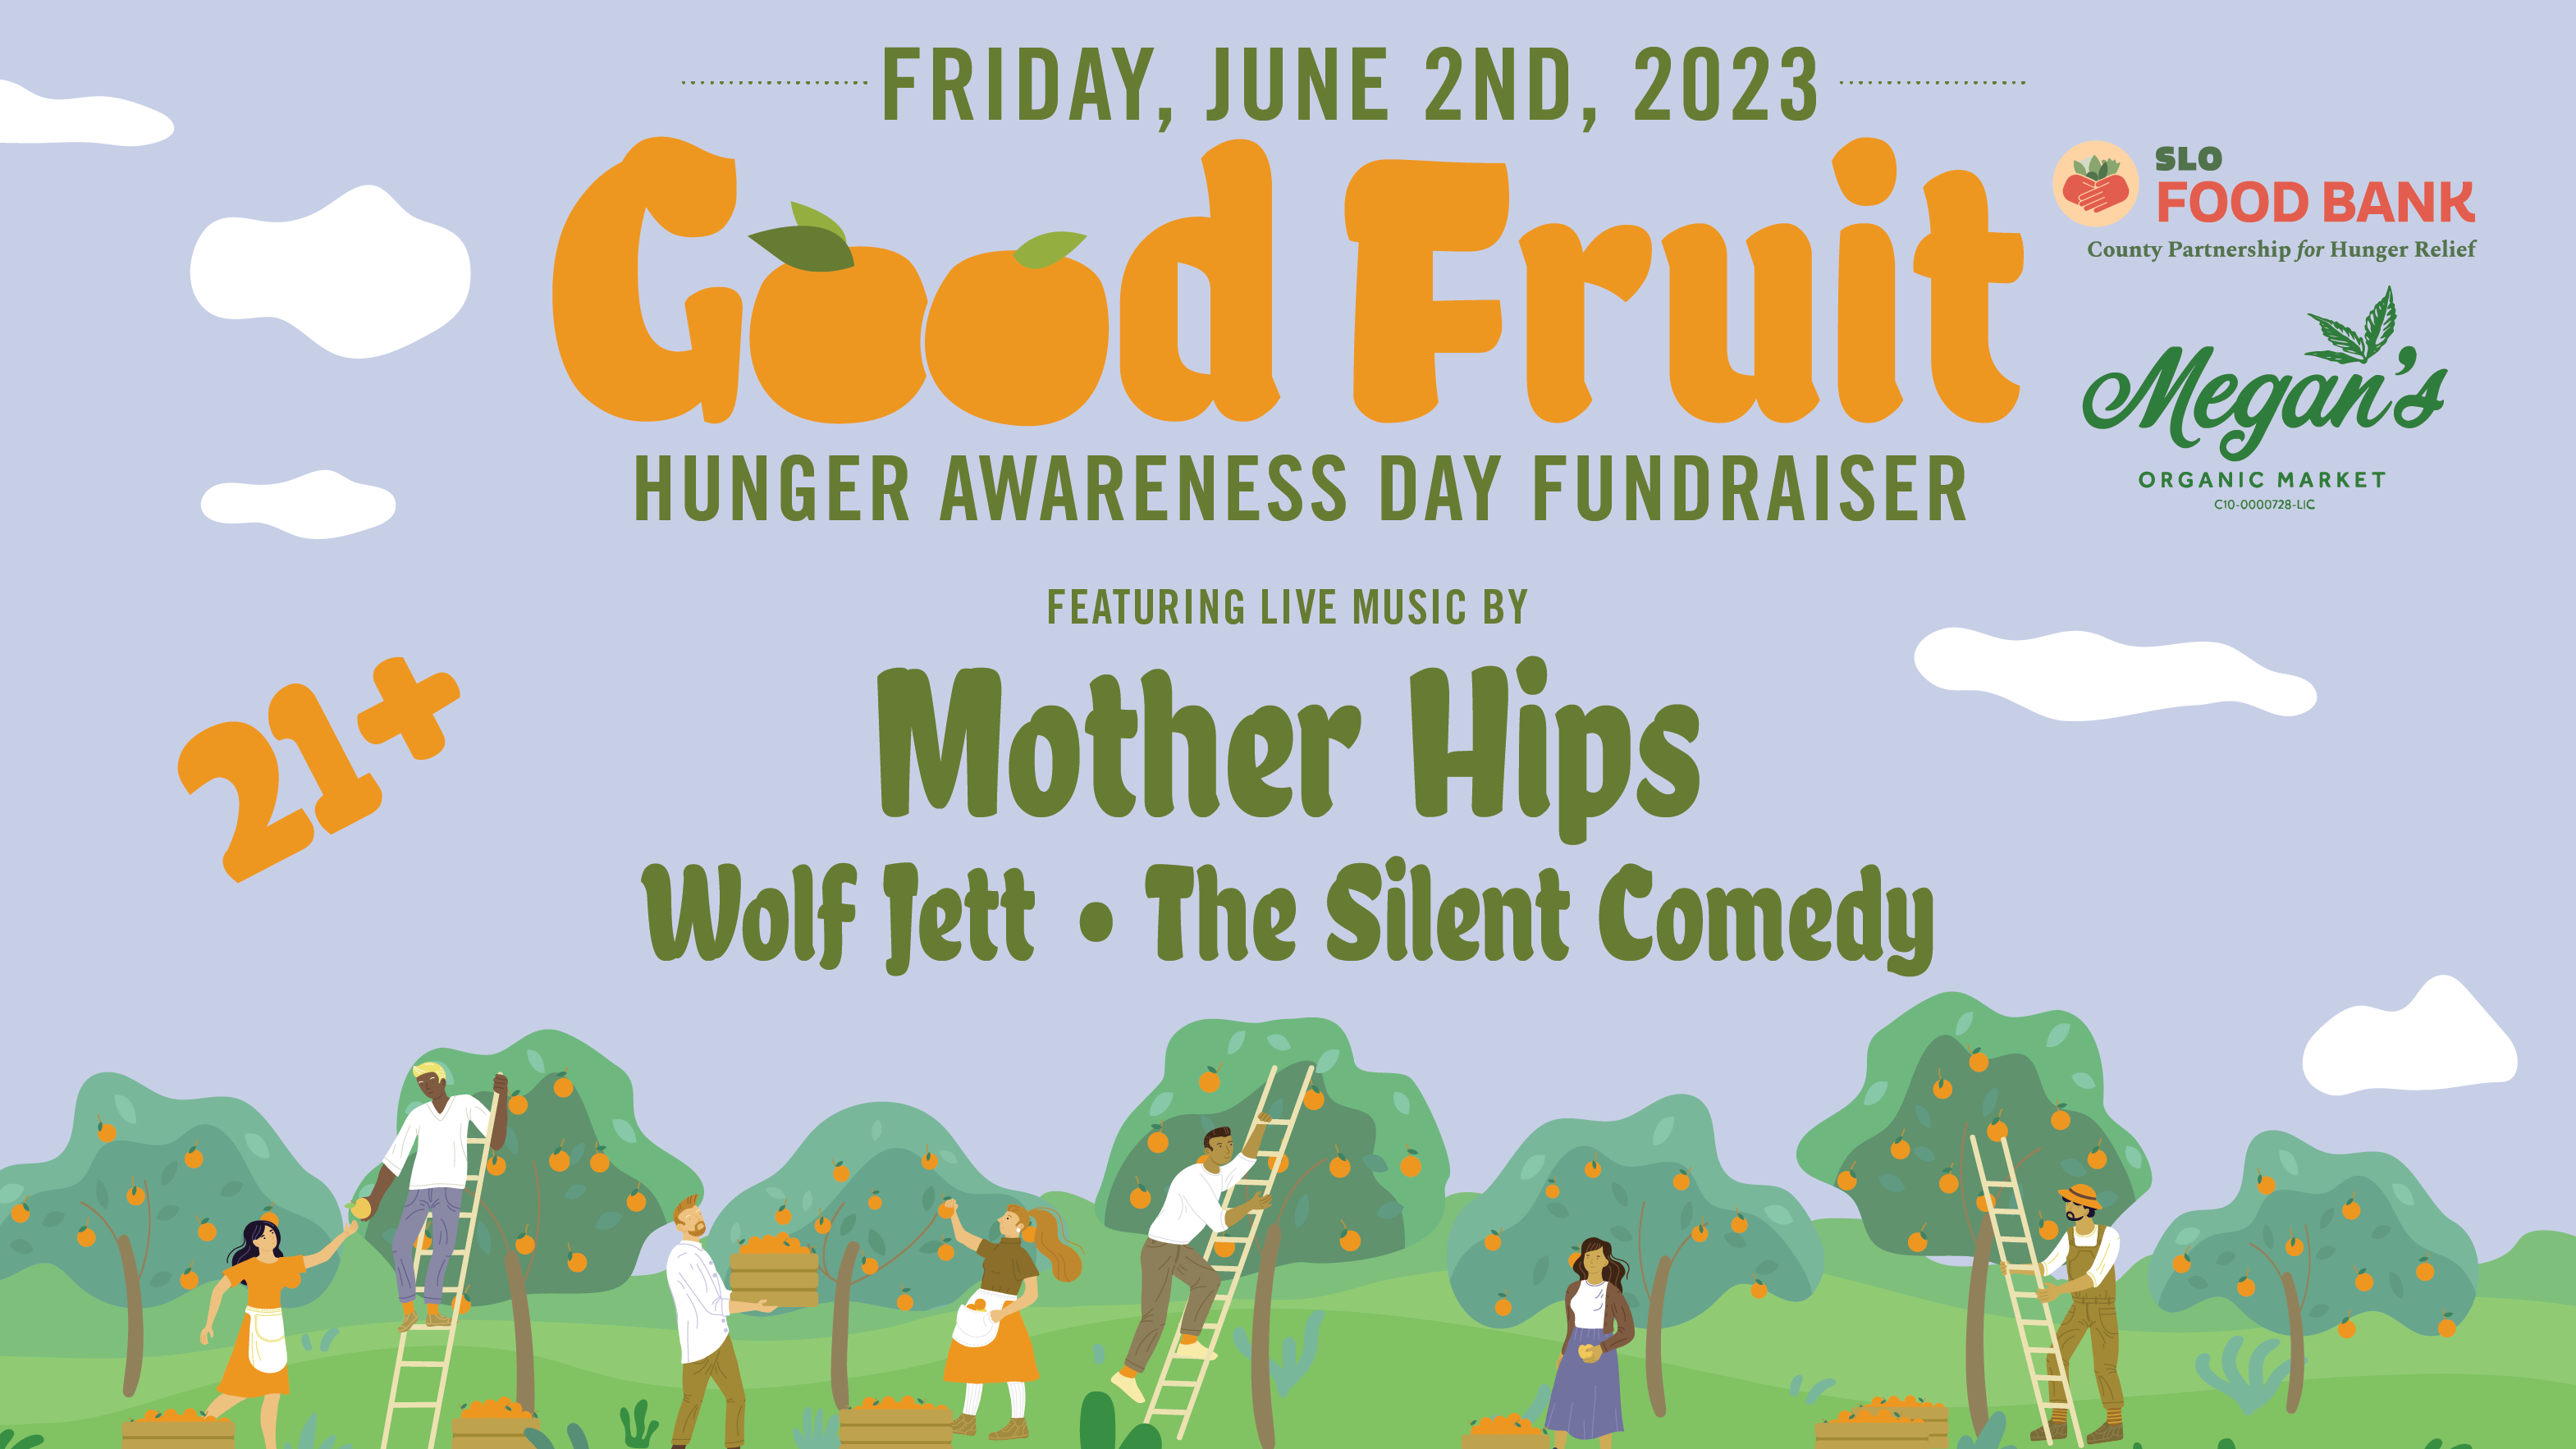 Good Fruit | A SLO Food Bank Benefit with Mother Hips / Wolf Jett / The Silent Comedy